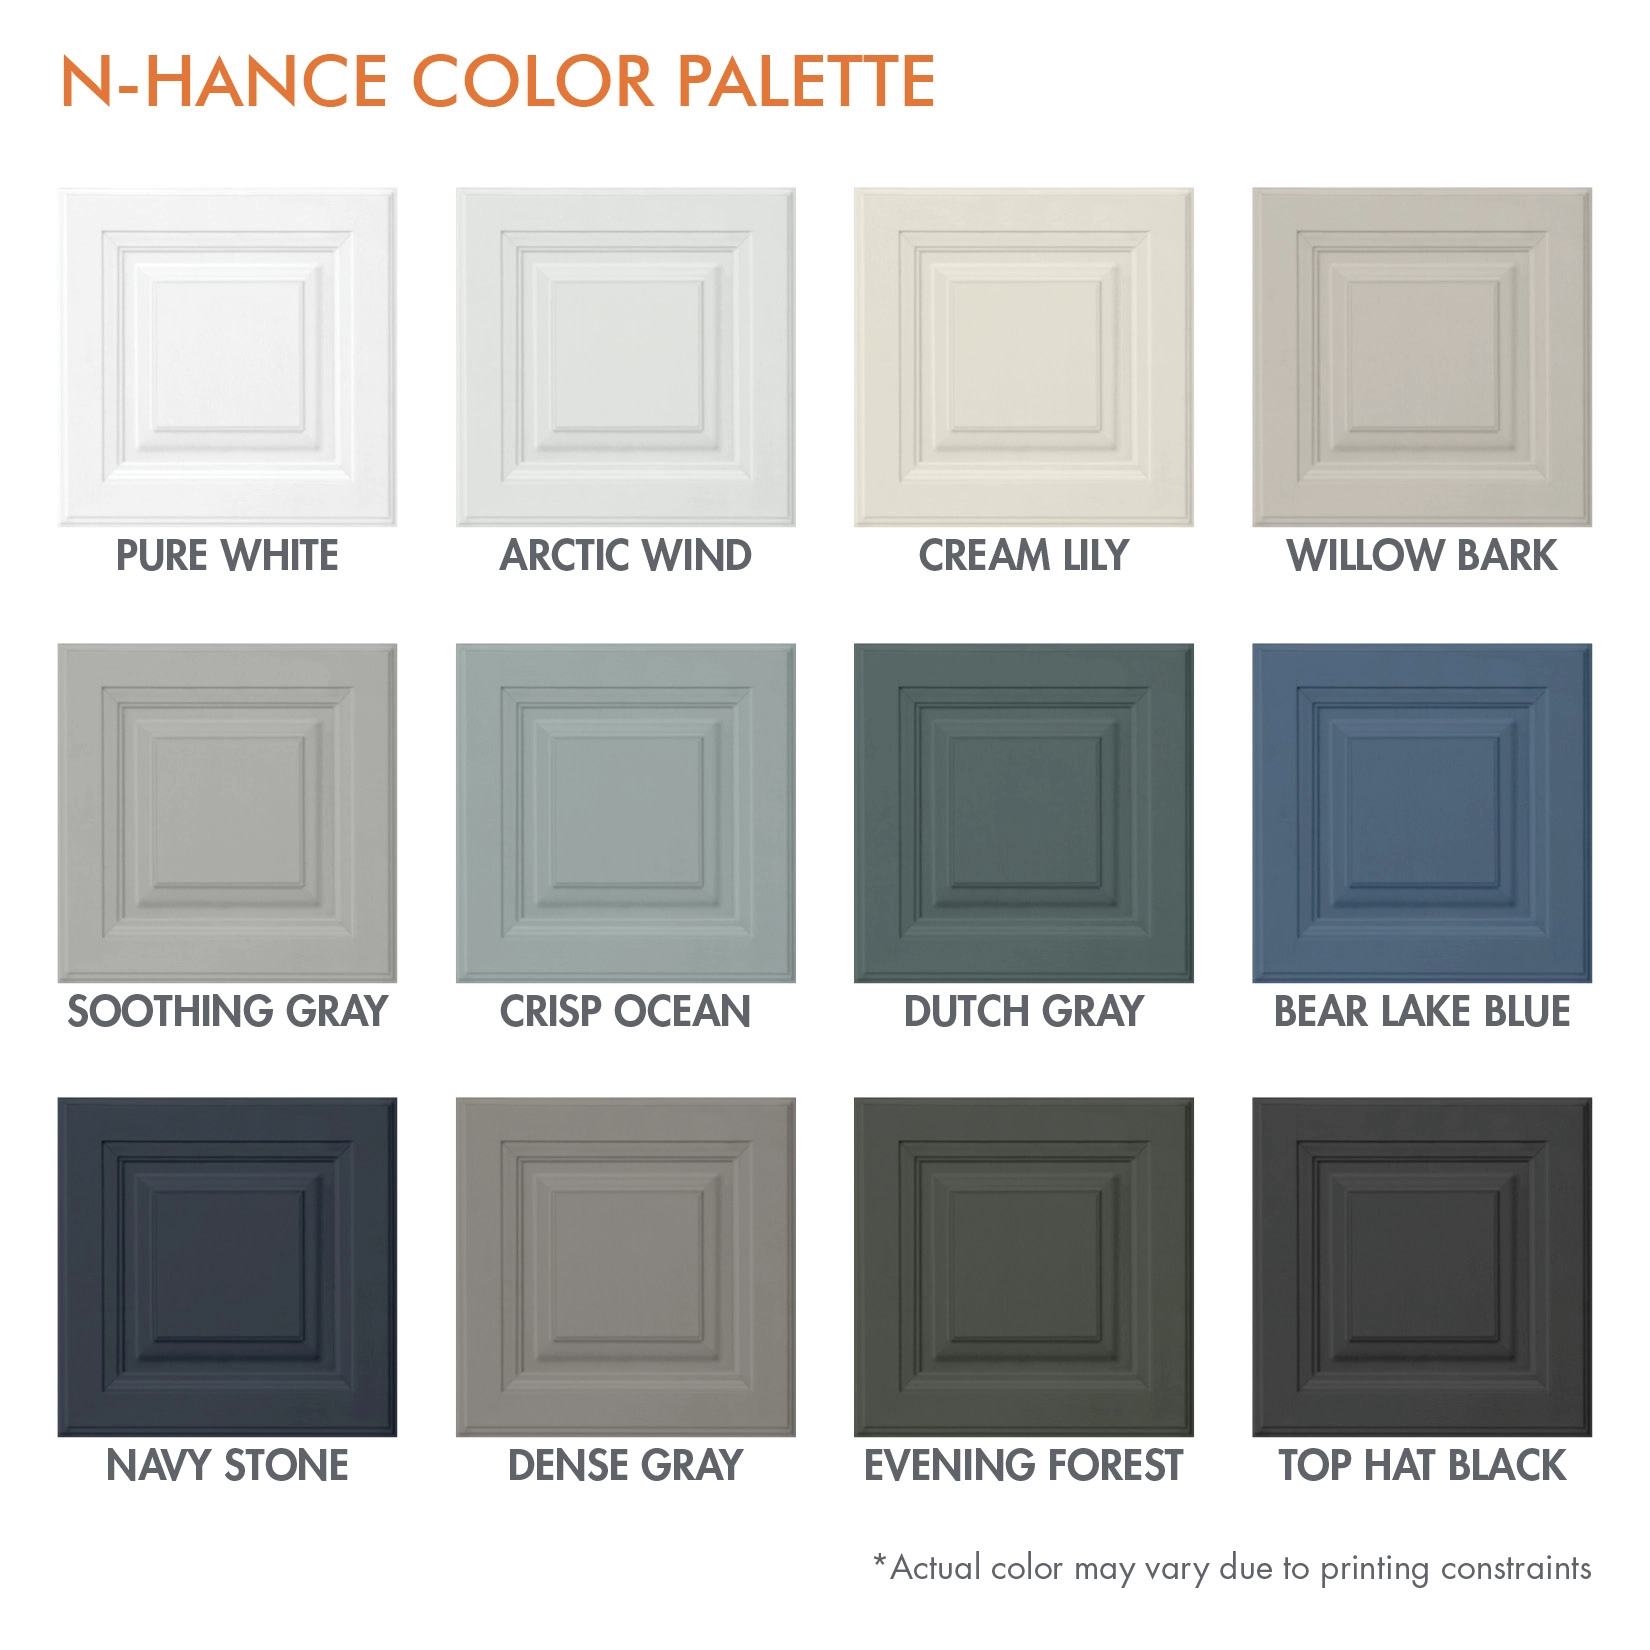 Text at the top of the image reads N-Hance Color Palette. The image shows 17 samples of cabinet doors painted in different colors in the N-Hance Color palette.